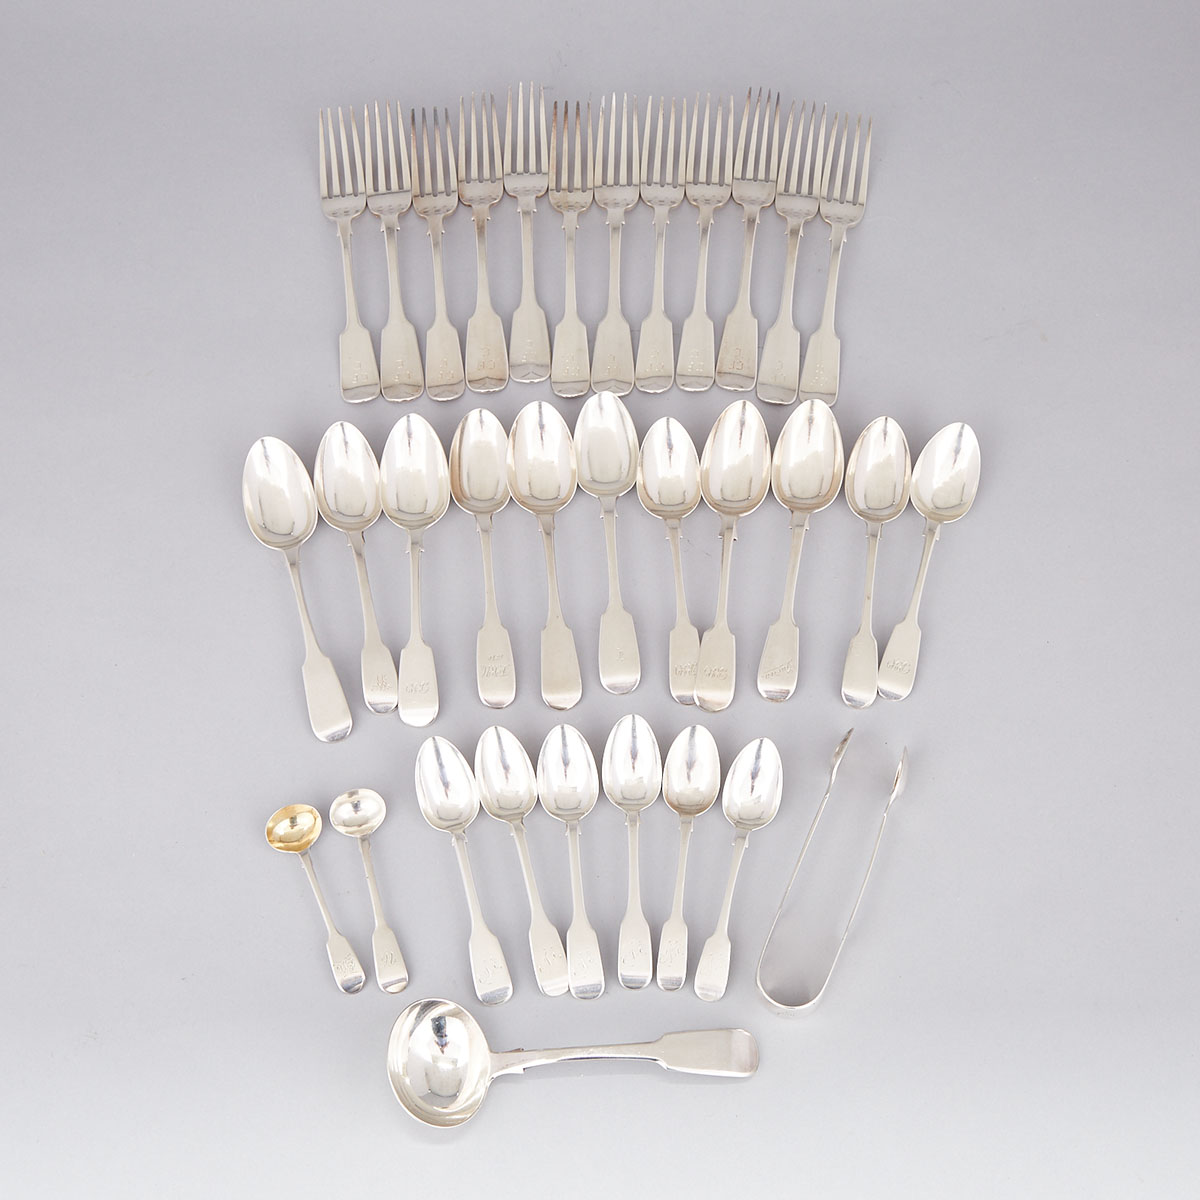 Late Georgian and Victorian Silver Fiddle Pattern Flatware, various makers, London and Exeter, c.1811-49